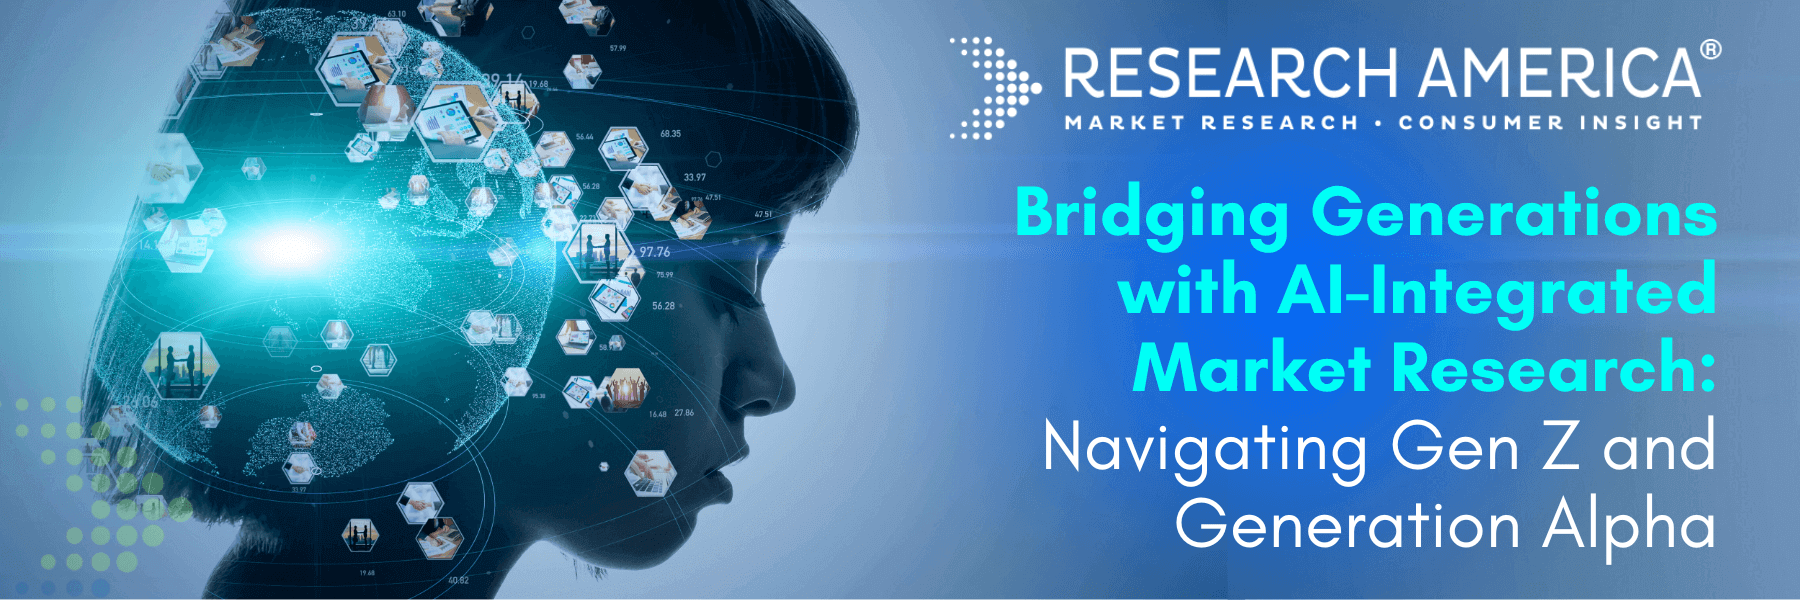 ai-integrated market research